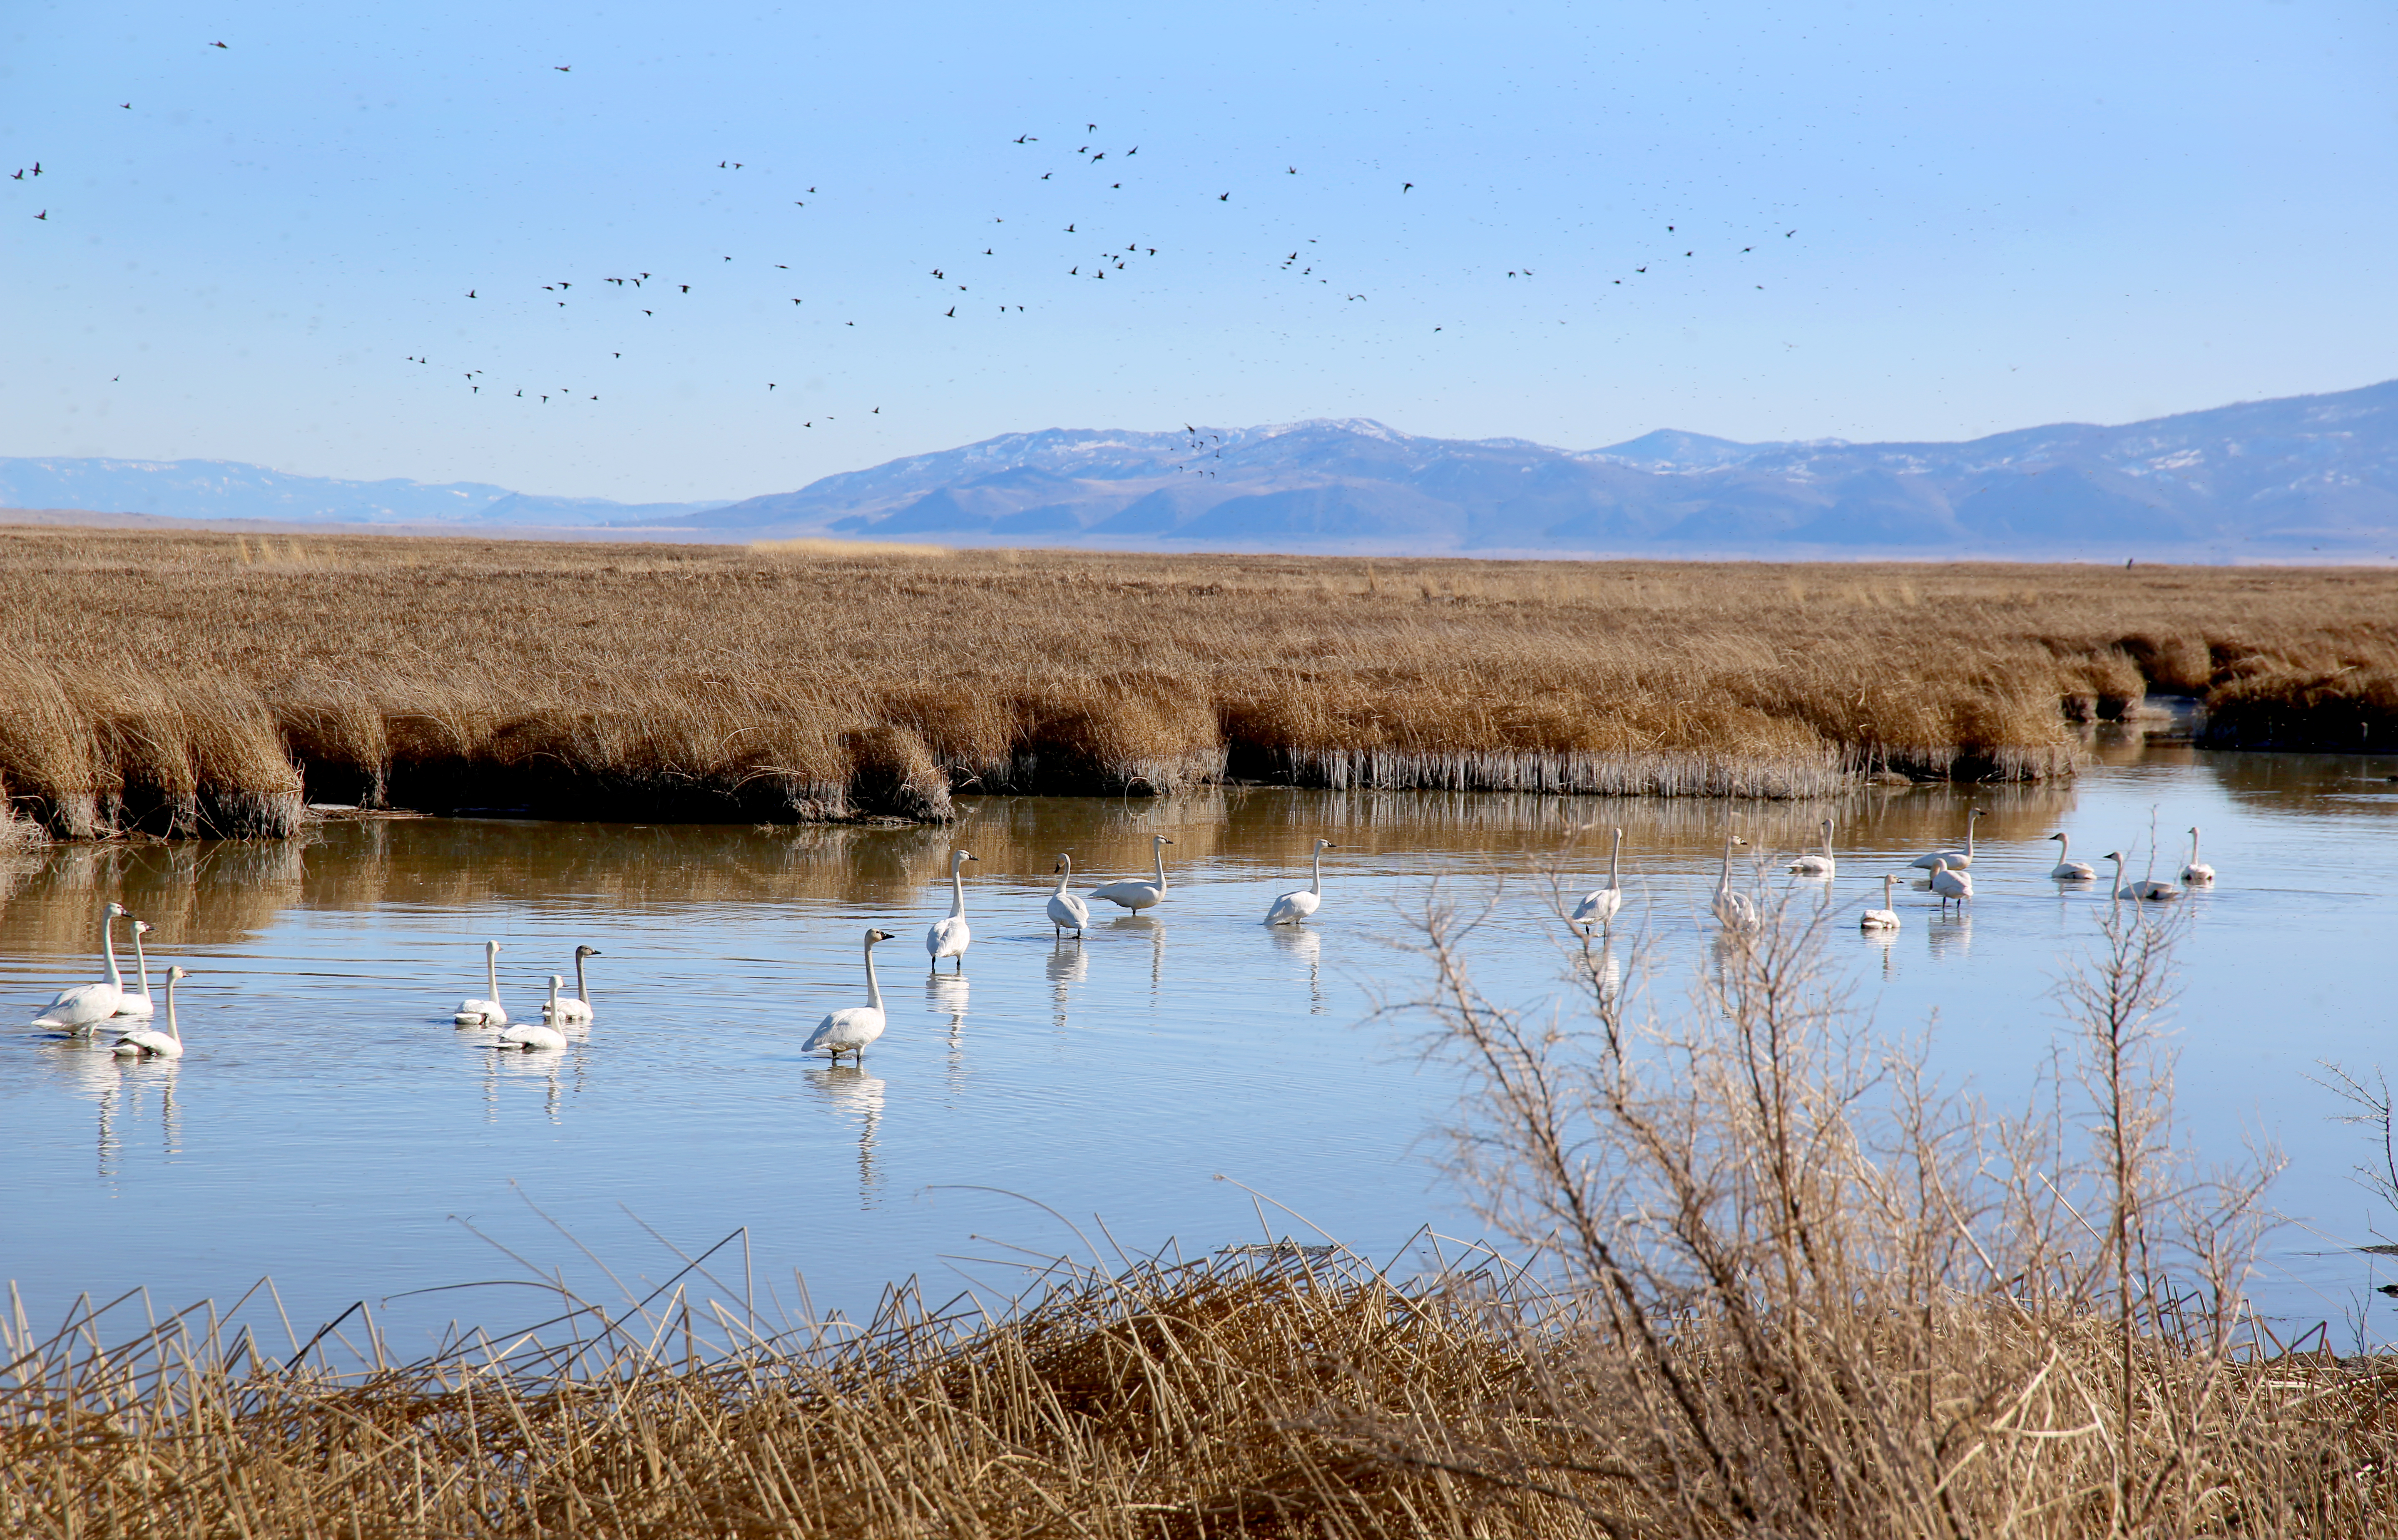 Tundra swans spend the winter at Summer Lake State Wildlife Area in Southern Oregon's Lake County, Feb. 18, 2022.